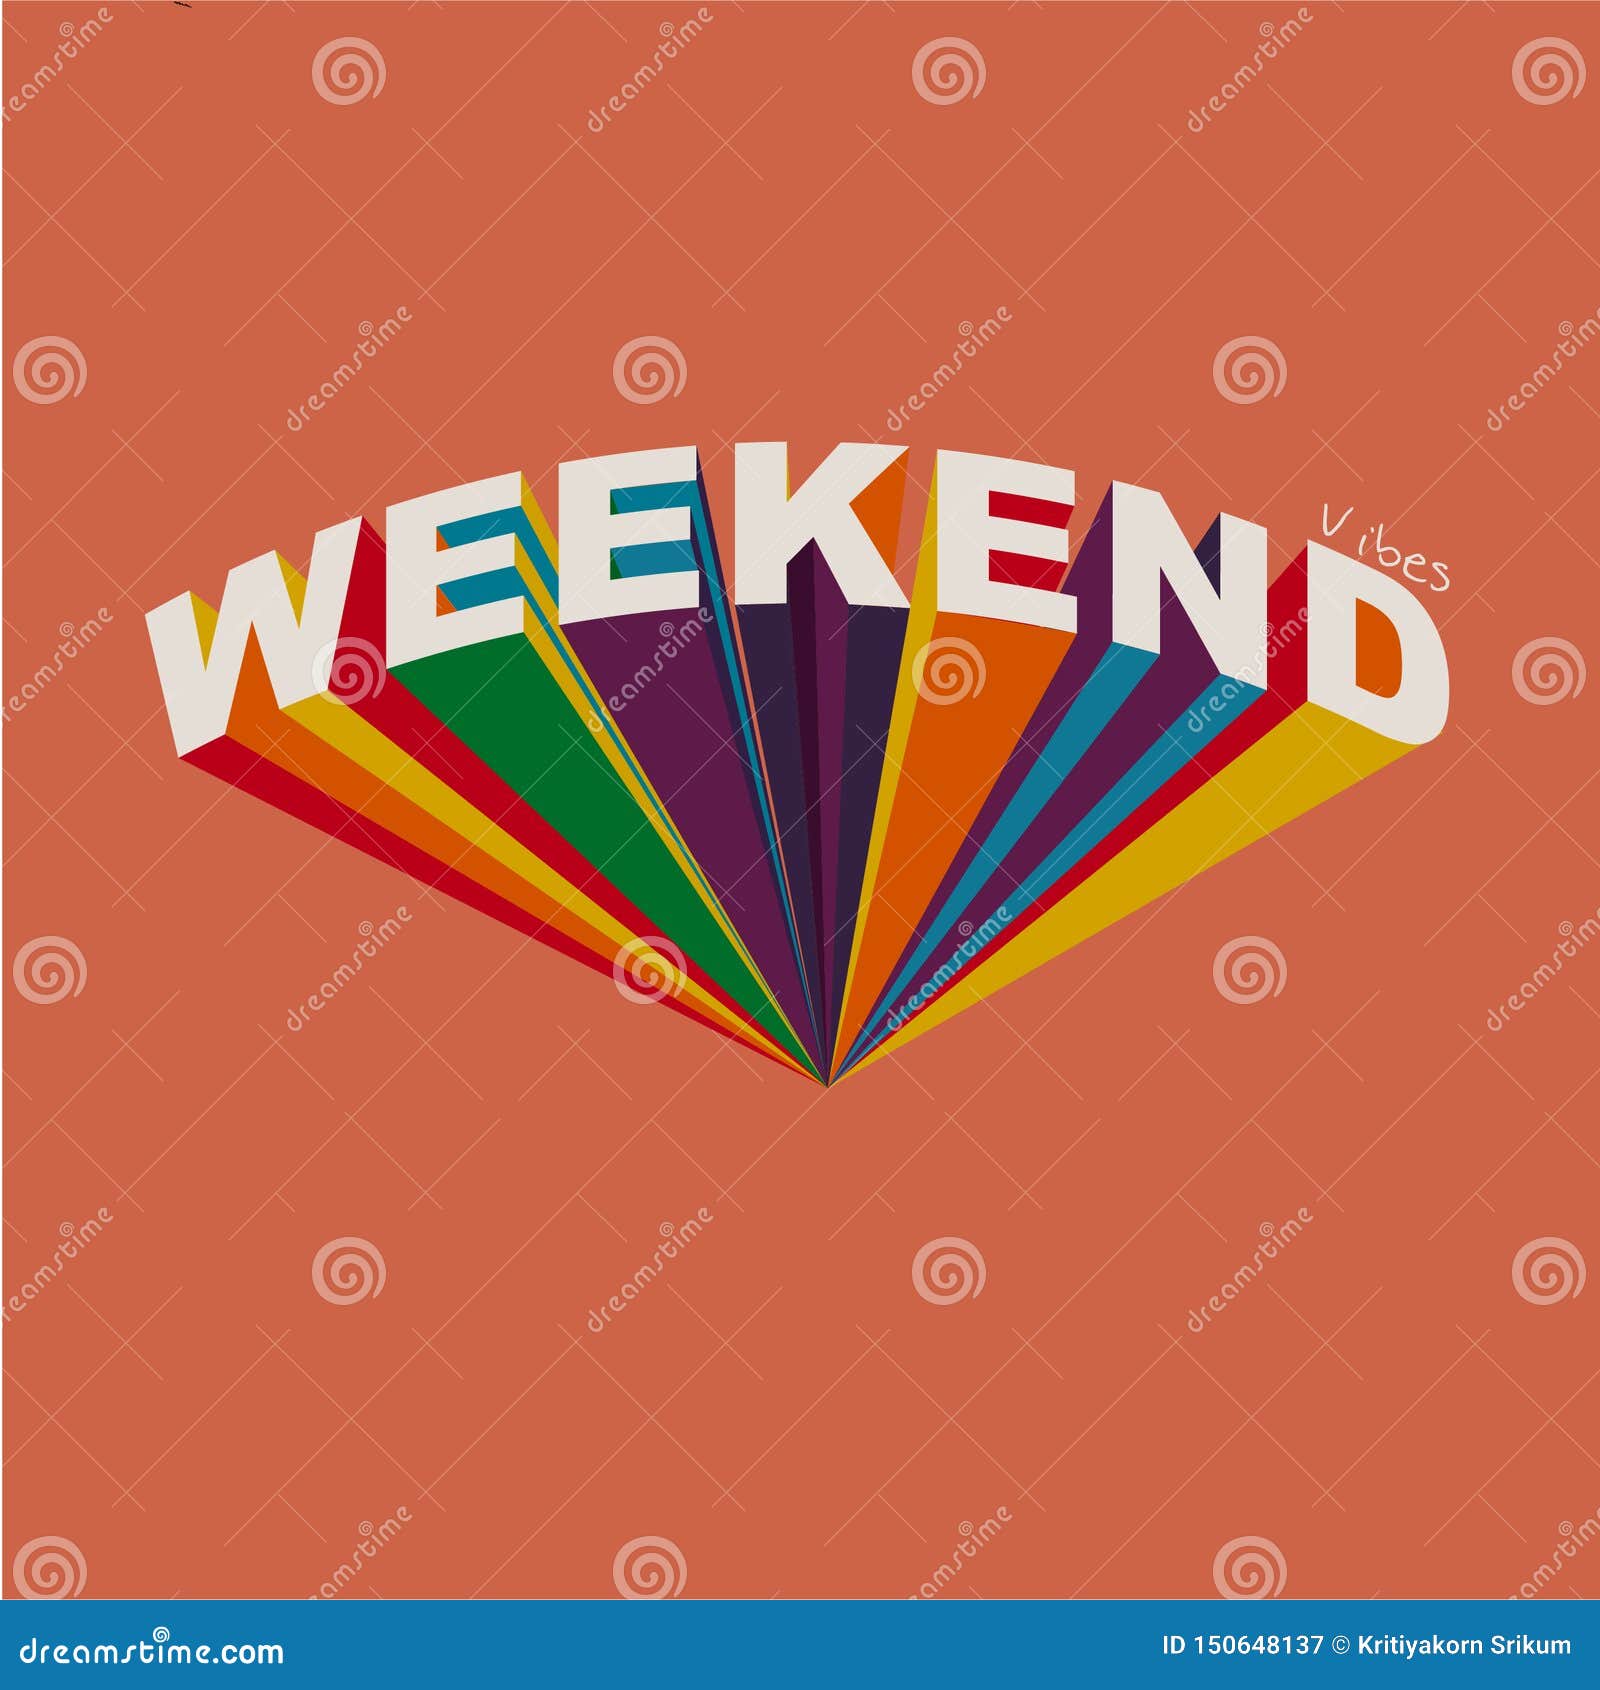 typo play in  postive quote or slogan colorful rainbow Ã¢â¬Å weekend vibes